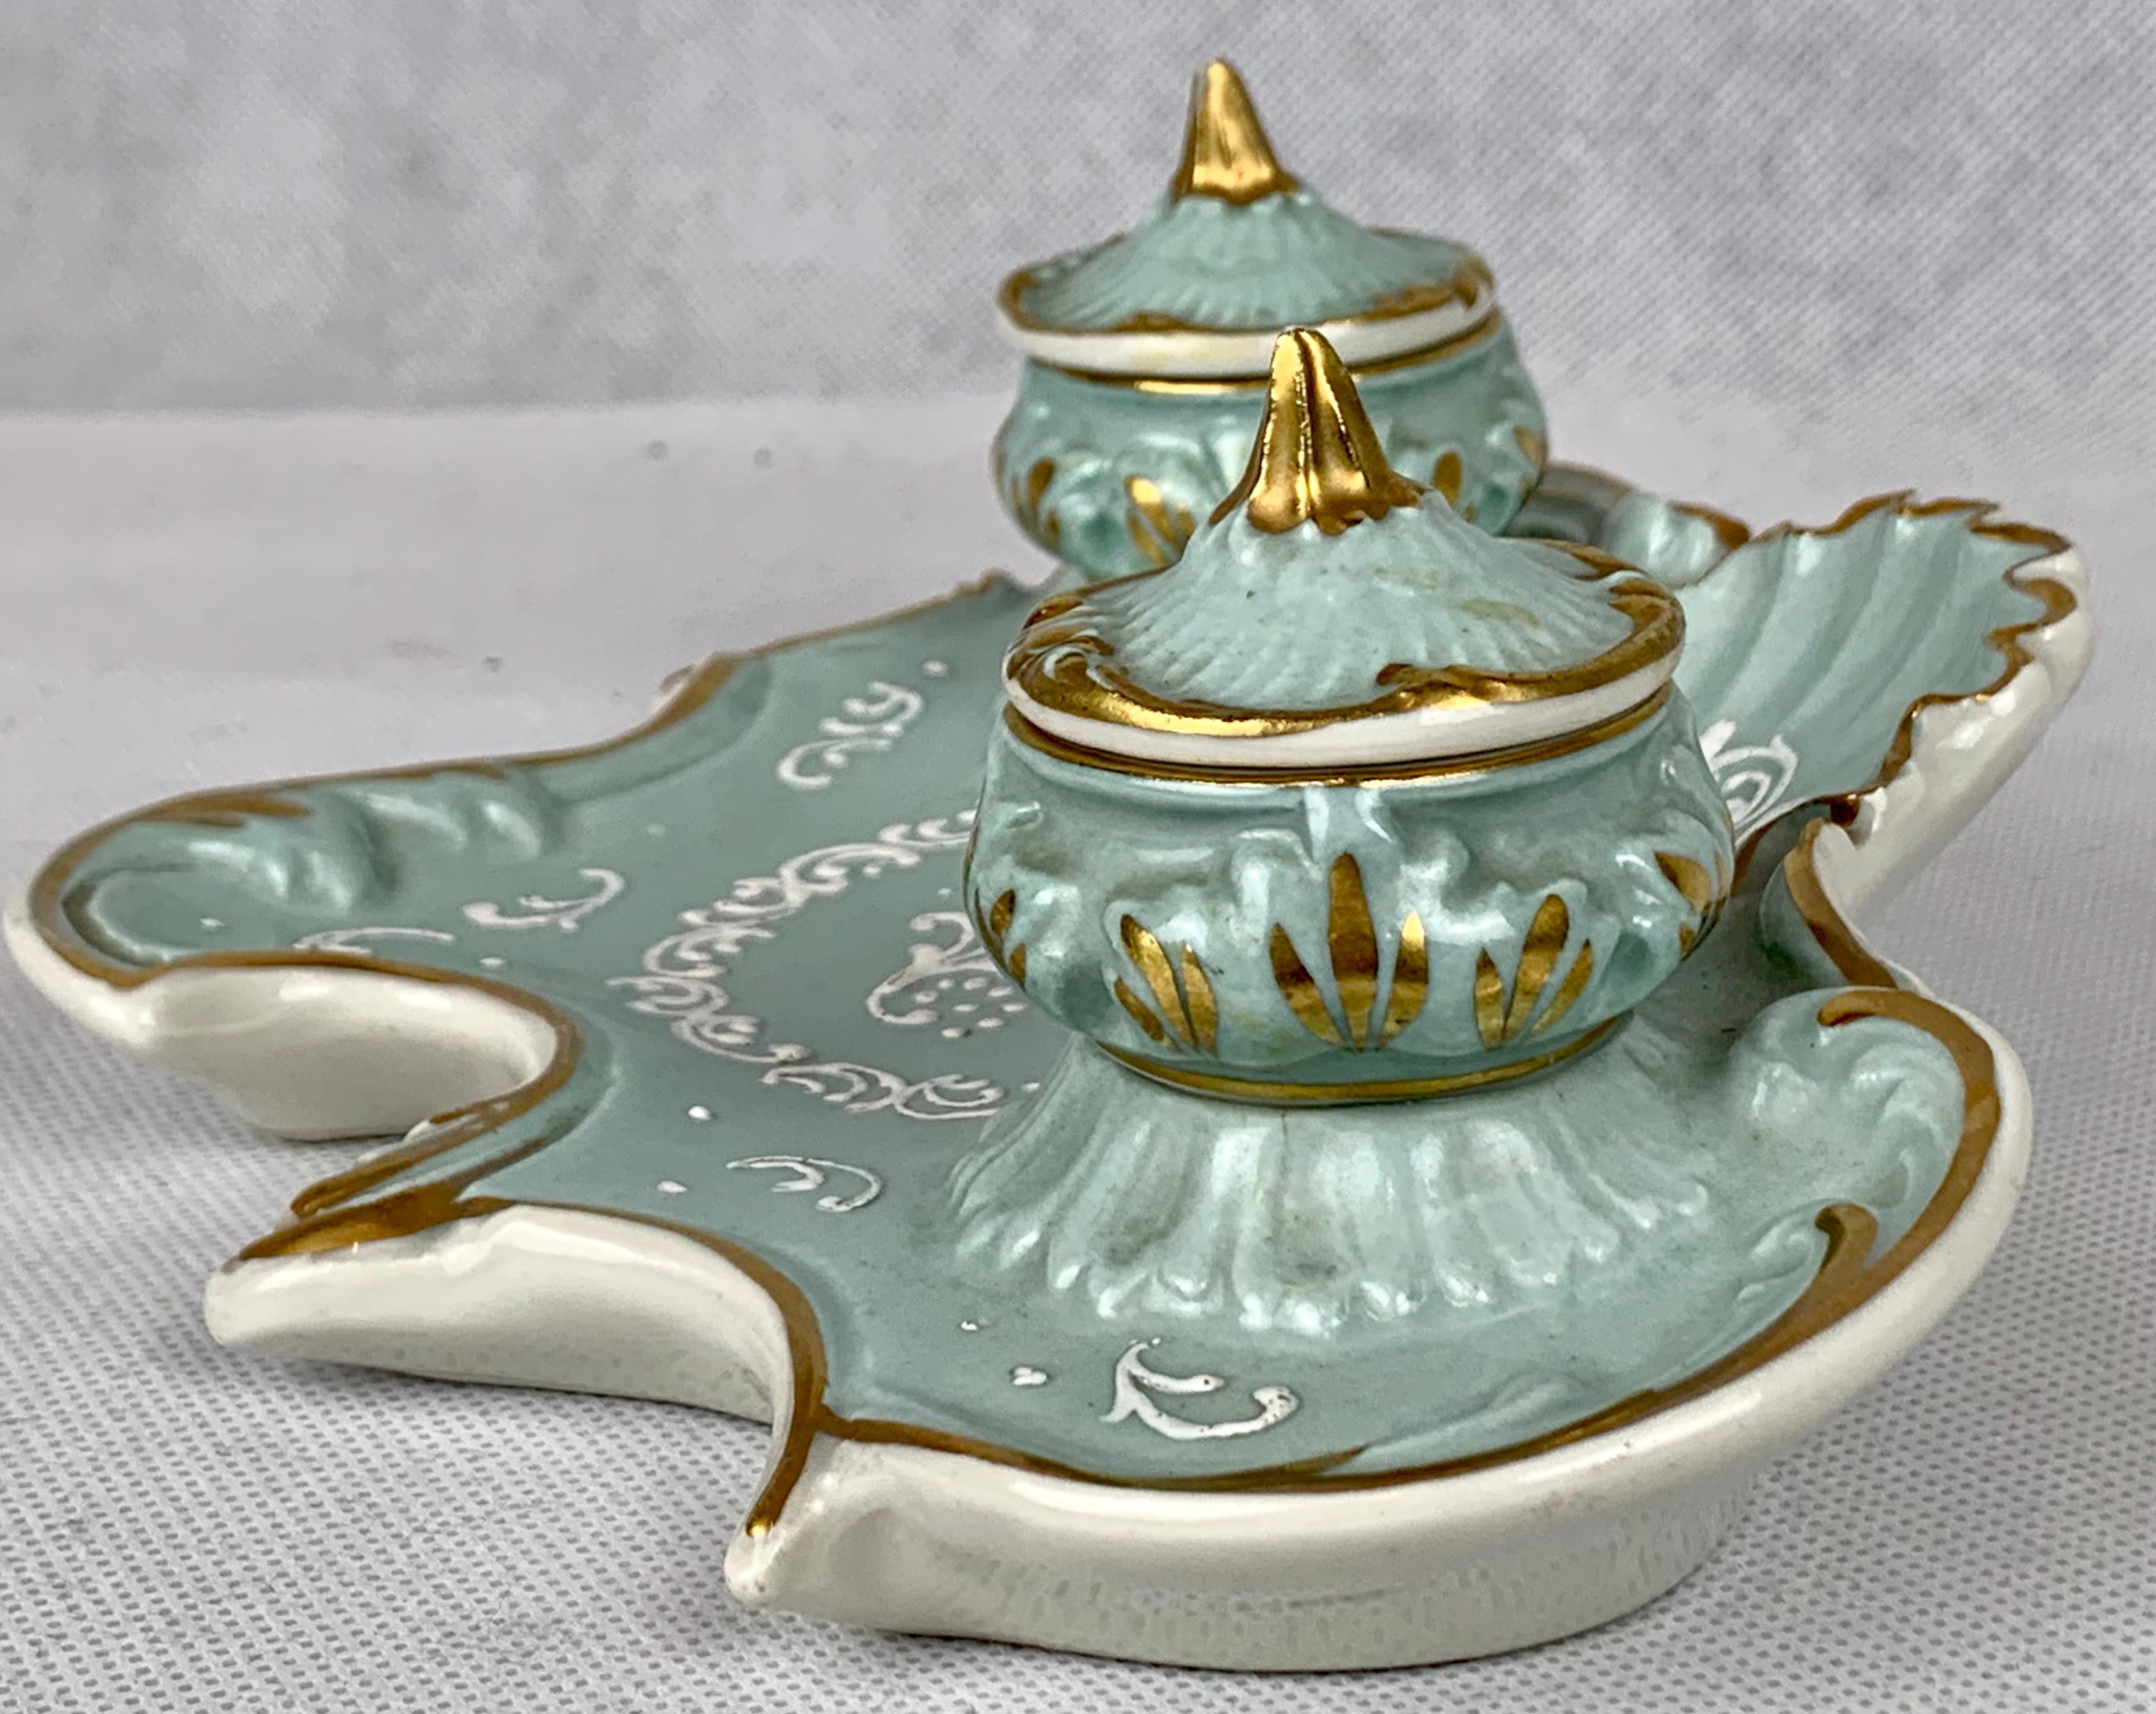 French porcelain inkstand with double inkpots in a soft sea foam color. The decoration is in white Pate-sur-Pate enamels. The inkpot covers are removable. The covers and the inkstand are trimmed in a soft gilt finish. You will find the bottom of the